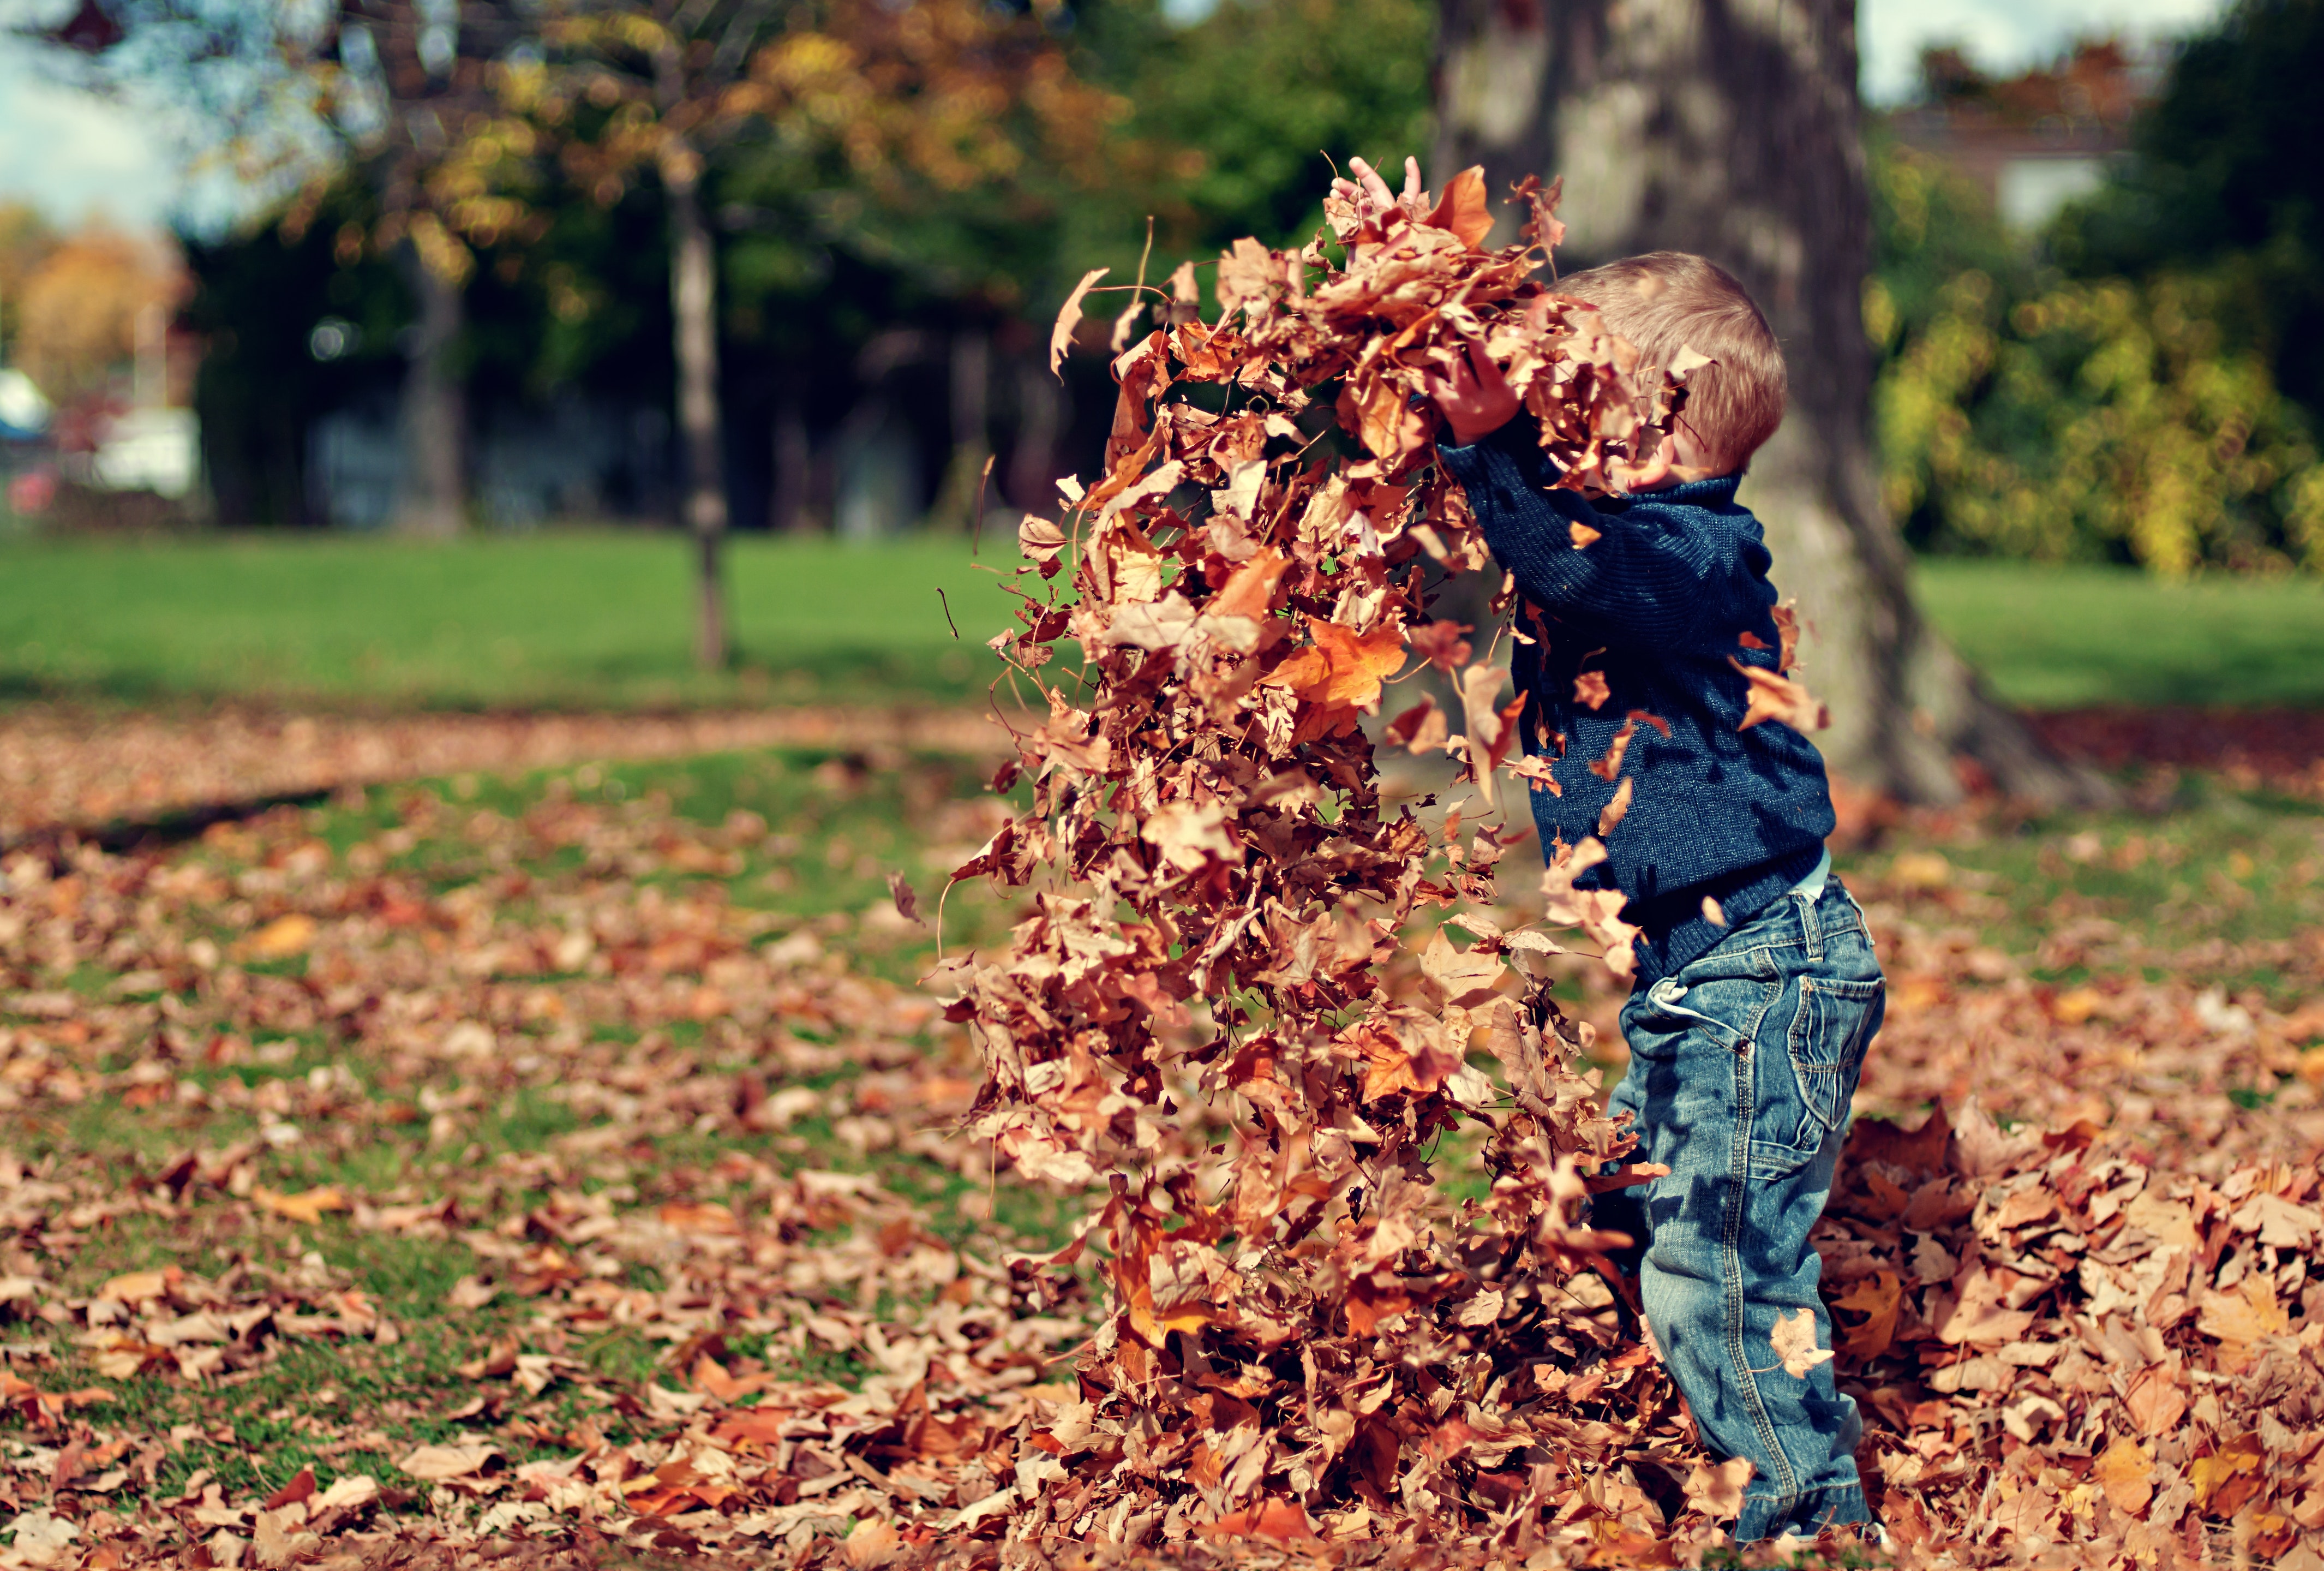 A toddler playing in the leaves